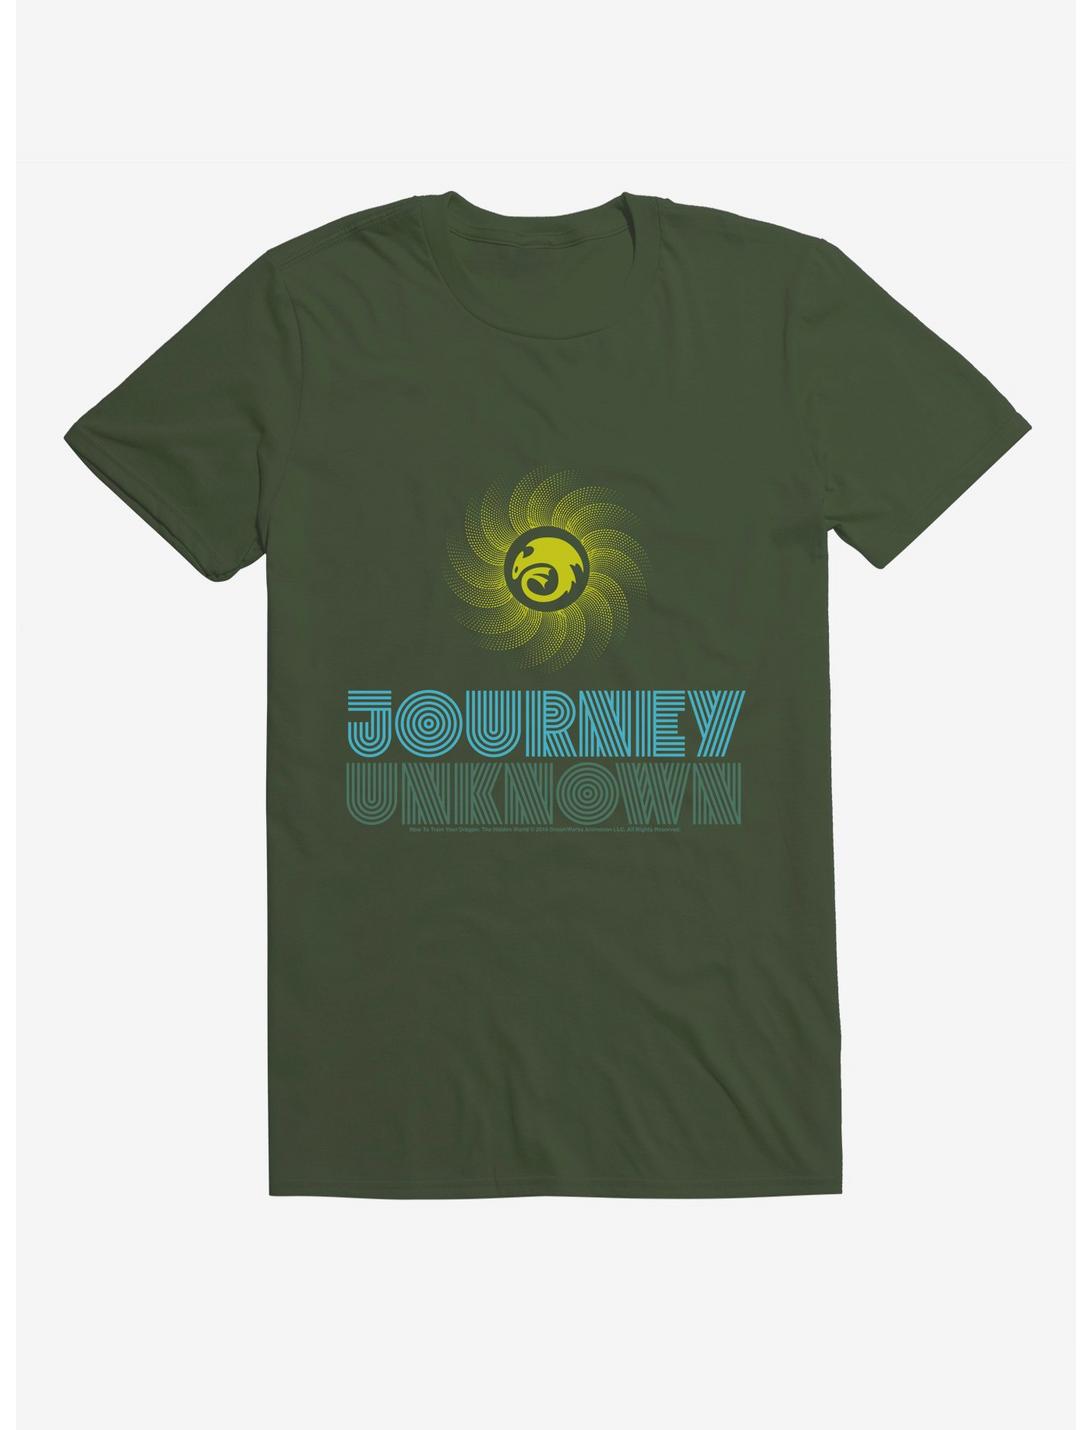 How To Train Your Dragon Journey Unknown T-Shirt, CITY GREEN, hi-res